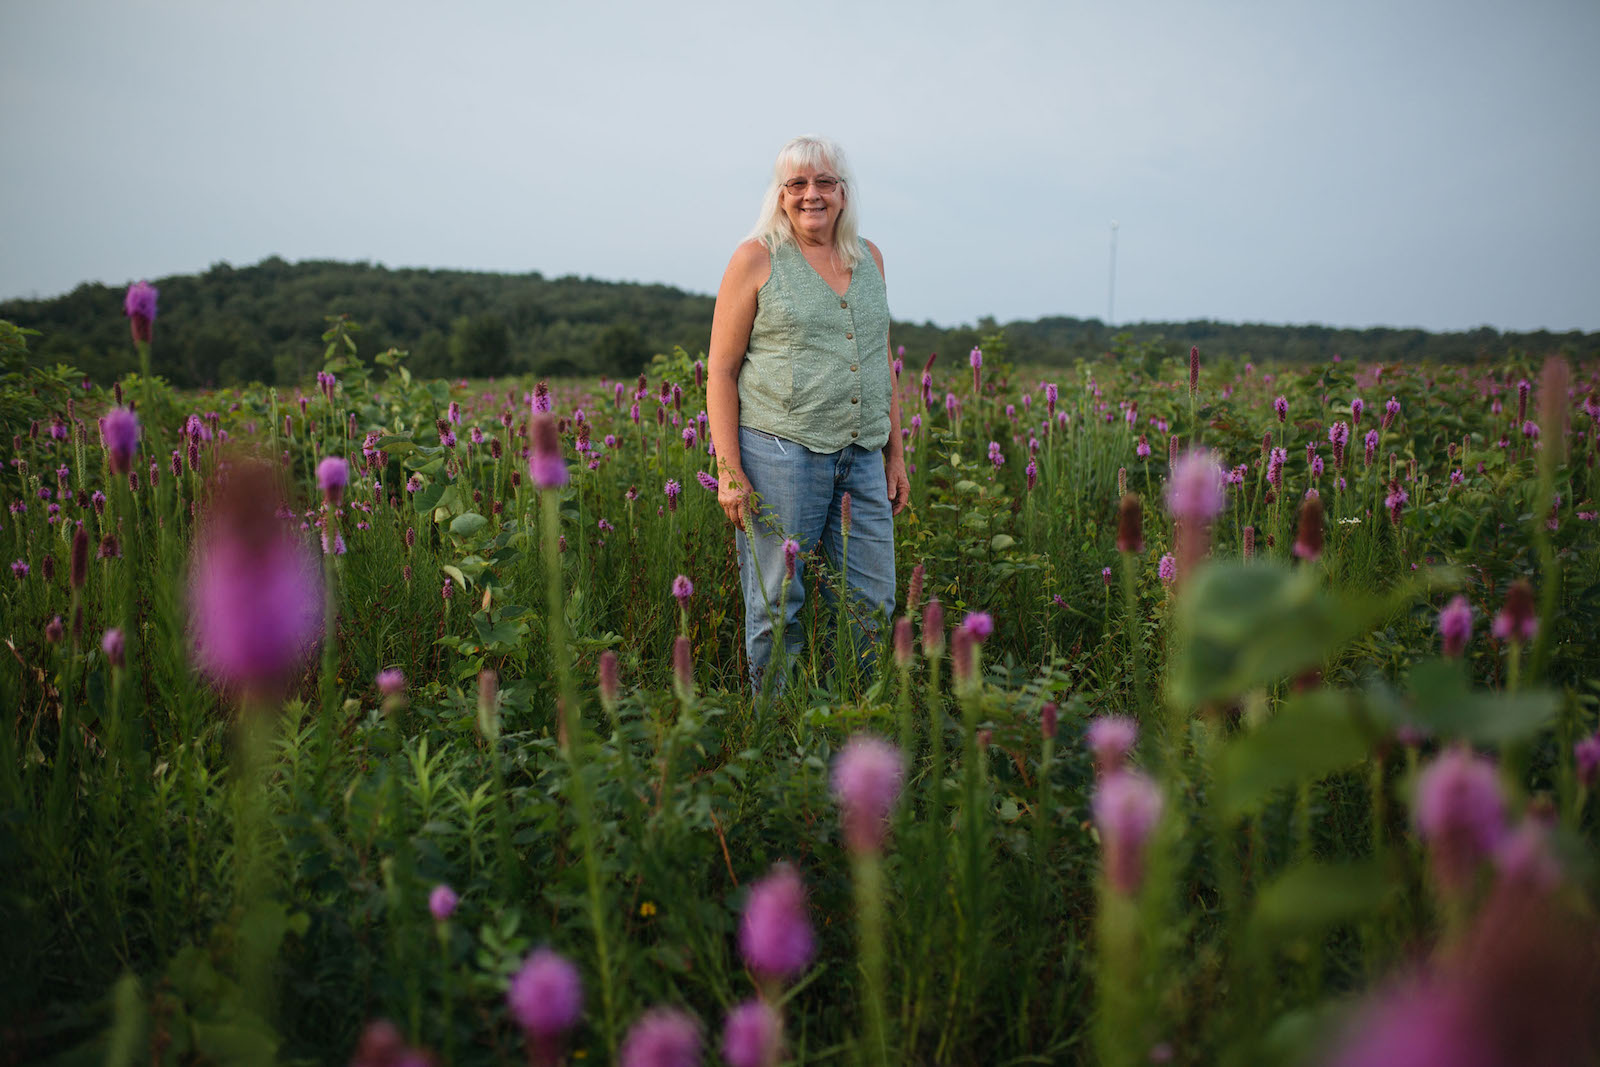 A senior woman stands in a field of purple tall flowers and grass